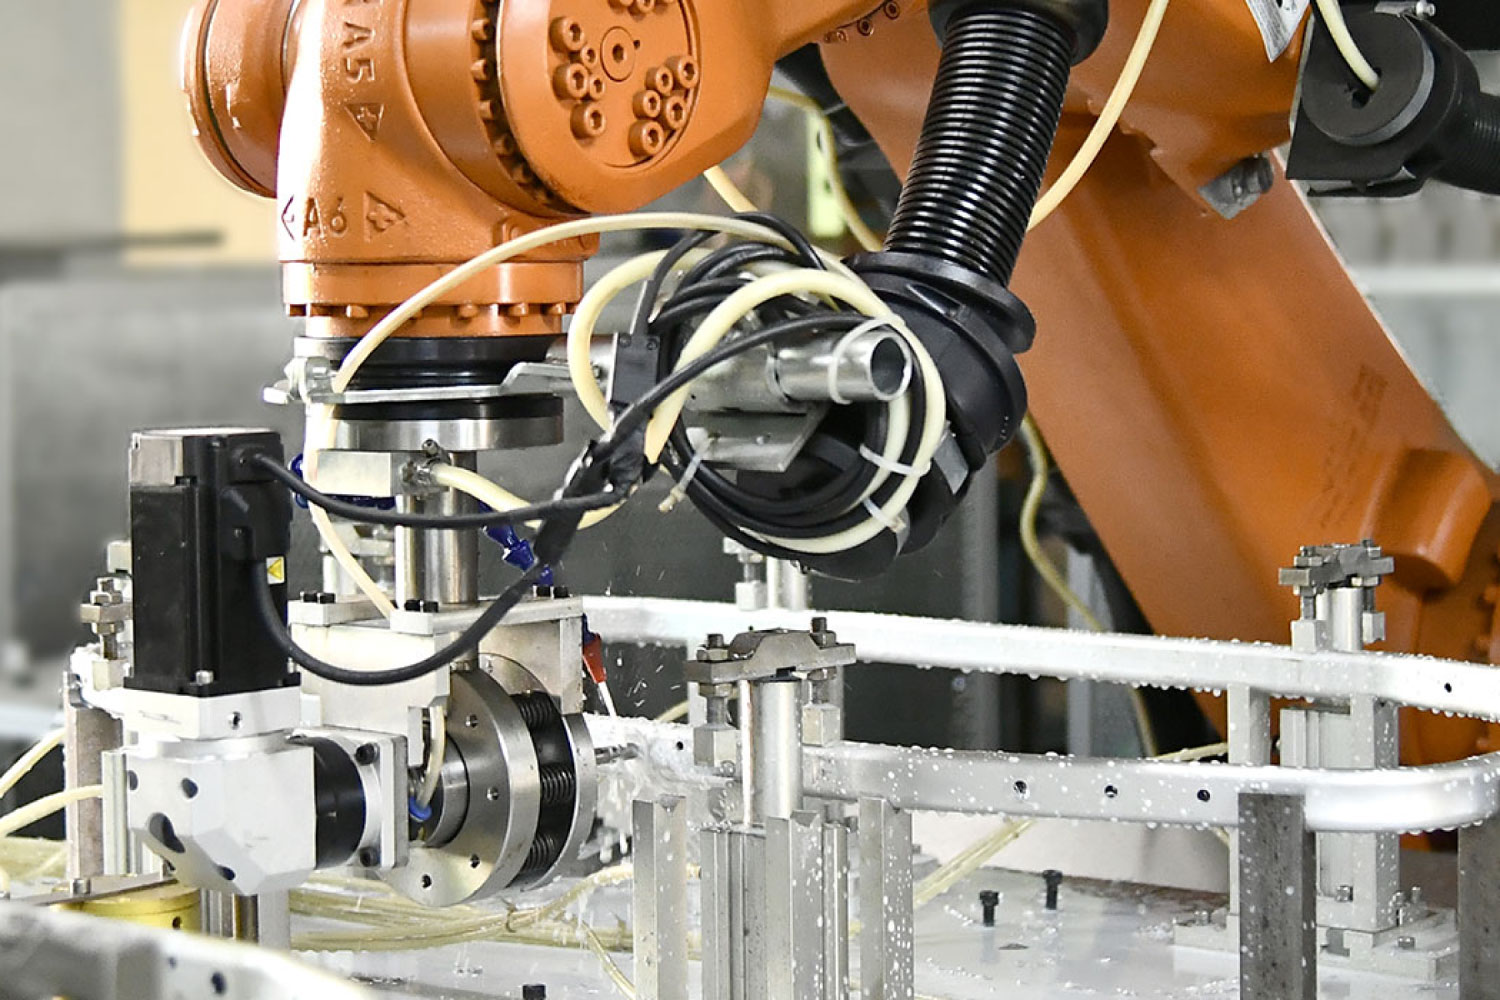 Automated robot in production line of Tetro metal factory, China